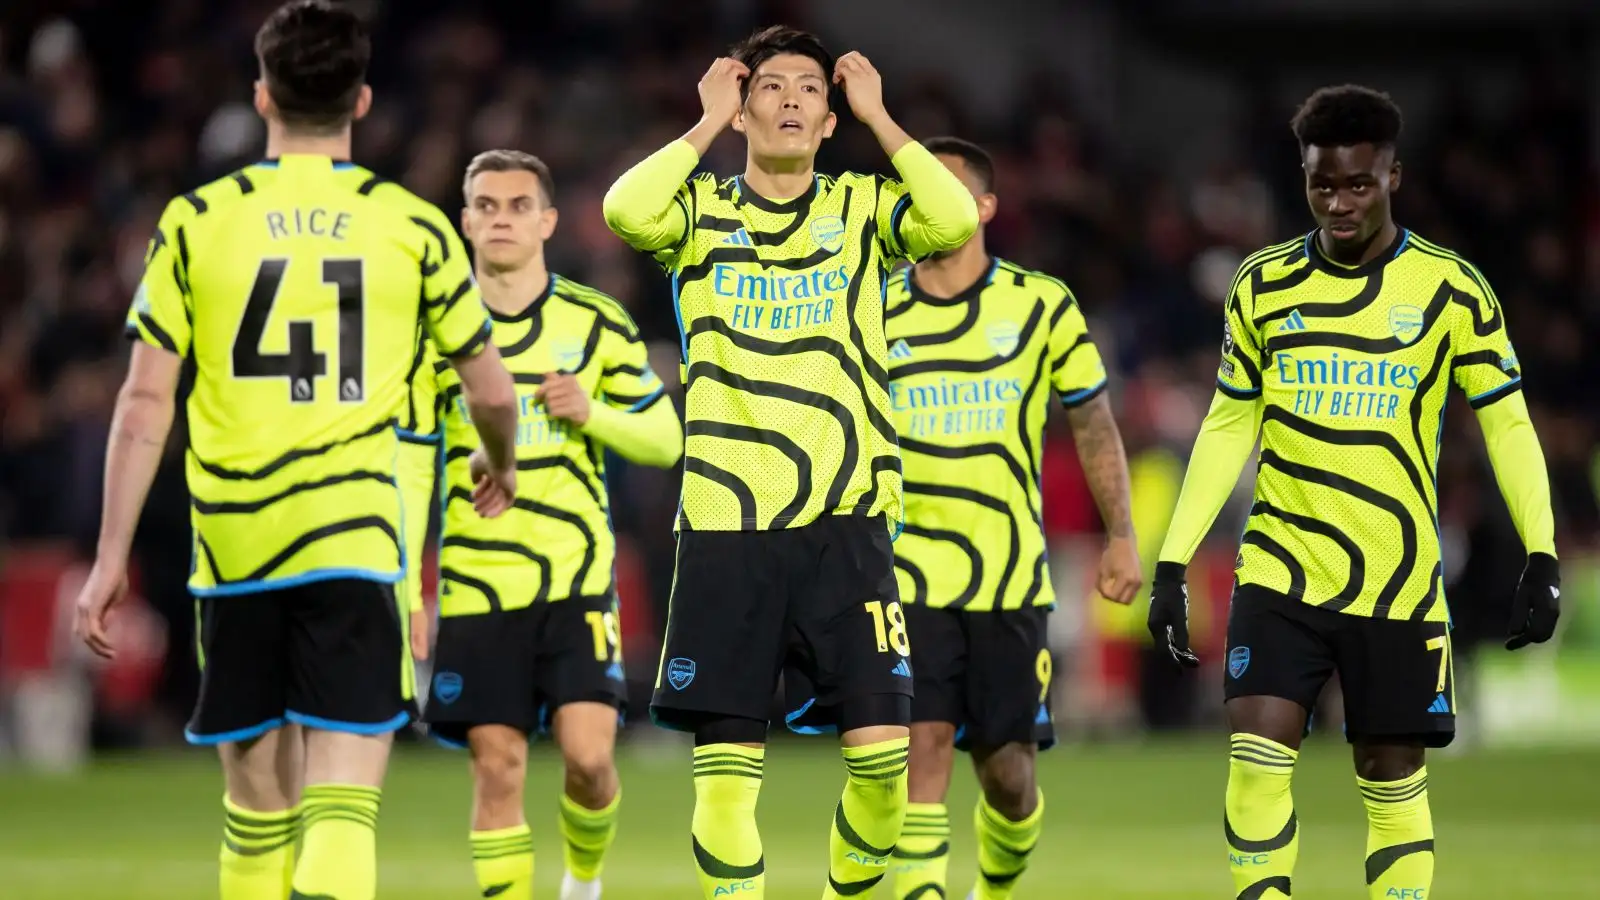 Arsenal protector Takehiro Tomiyasu with his teammates before a Premier League match.